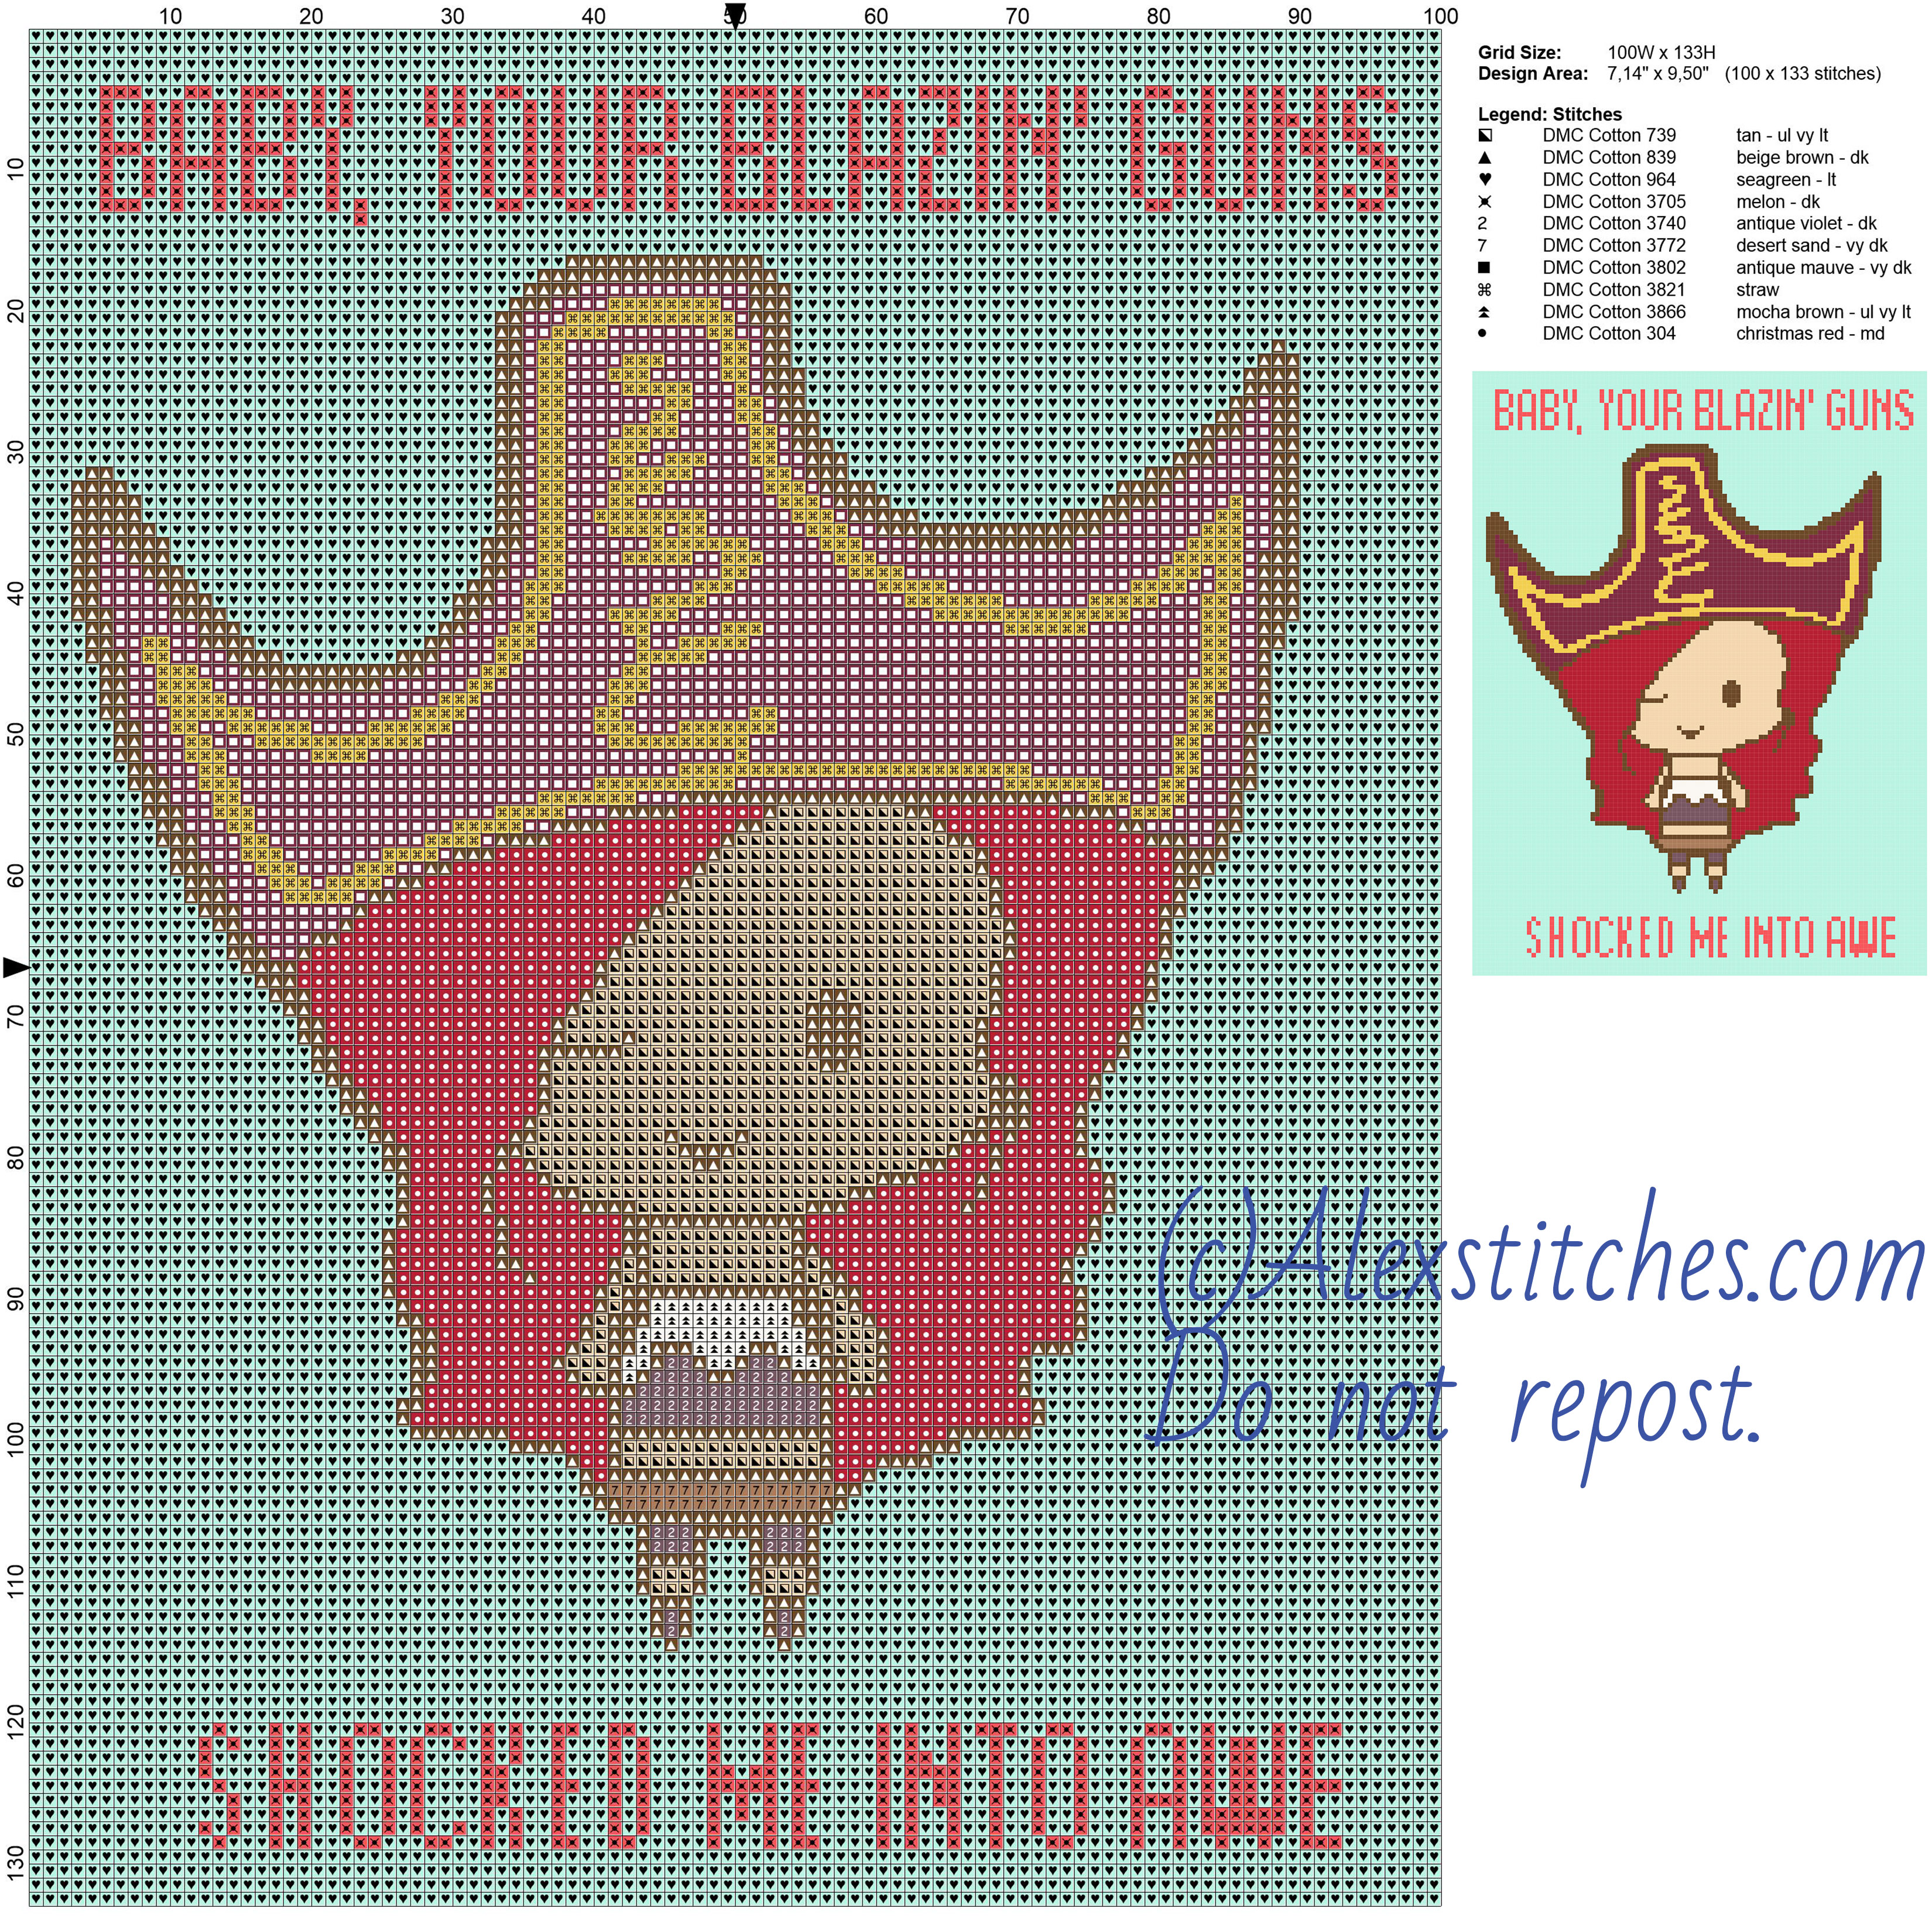 Chibi Miss Fortune League of Legends quotes free cross stitch pattern videogames 100x133 10 colors-01